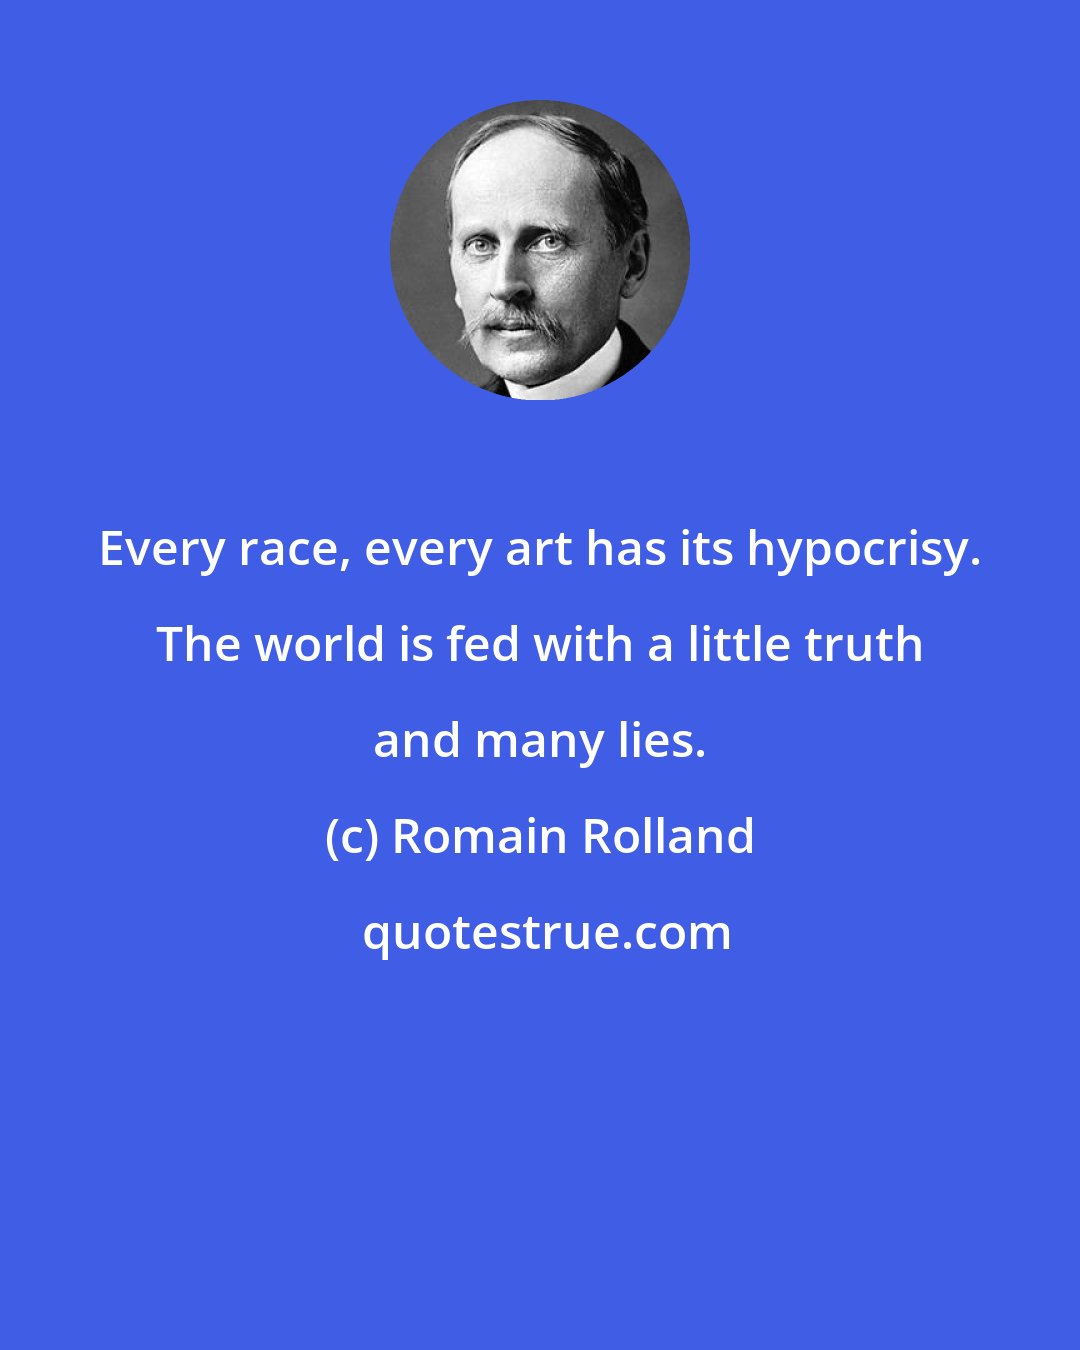 Romain Rolland: Every race, every art has its hypocrisy. The world is fed with a little truth and many lies.